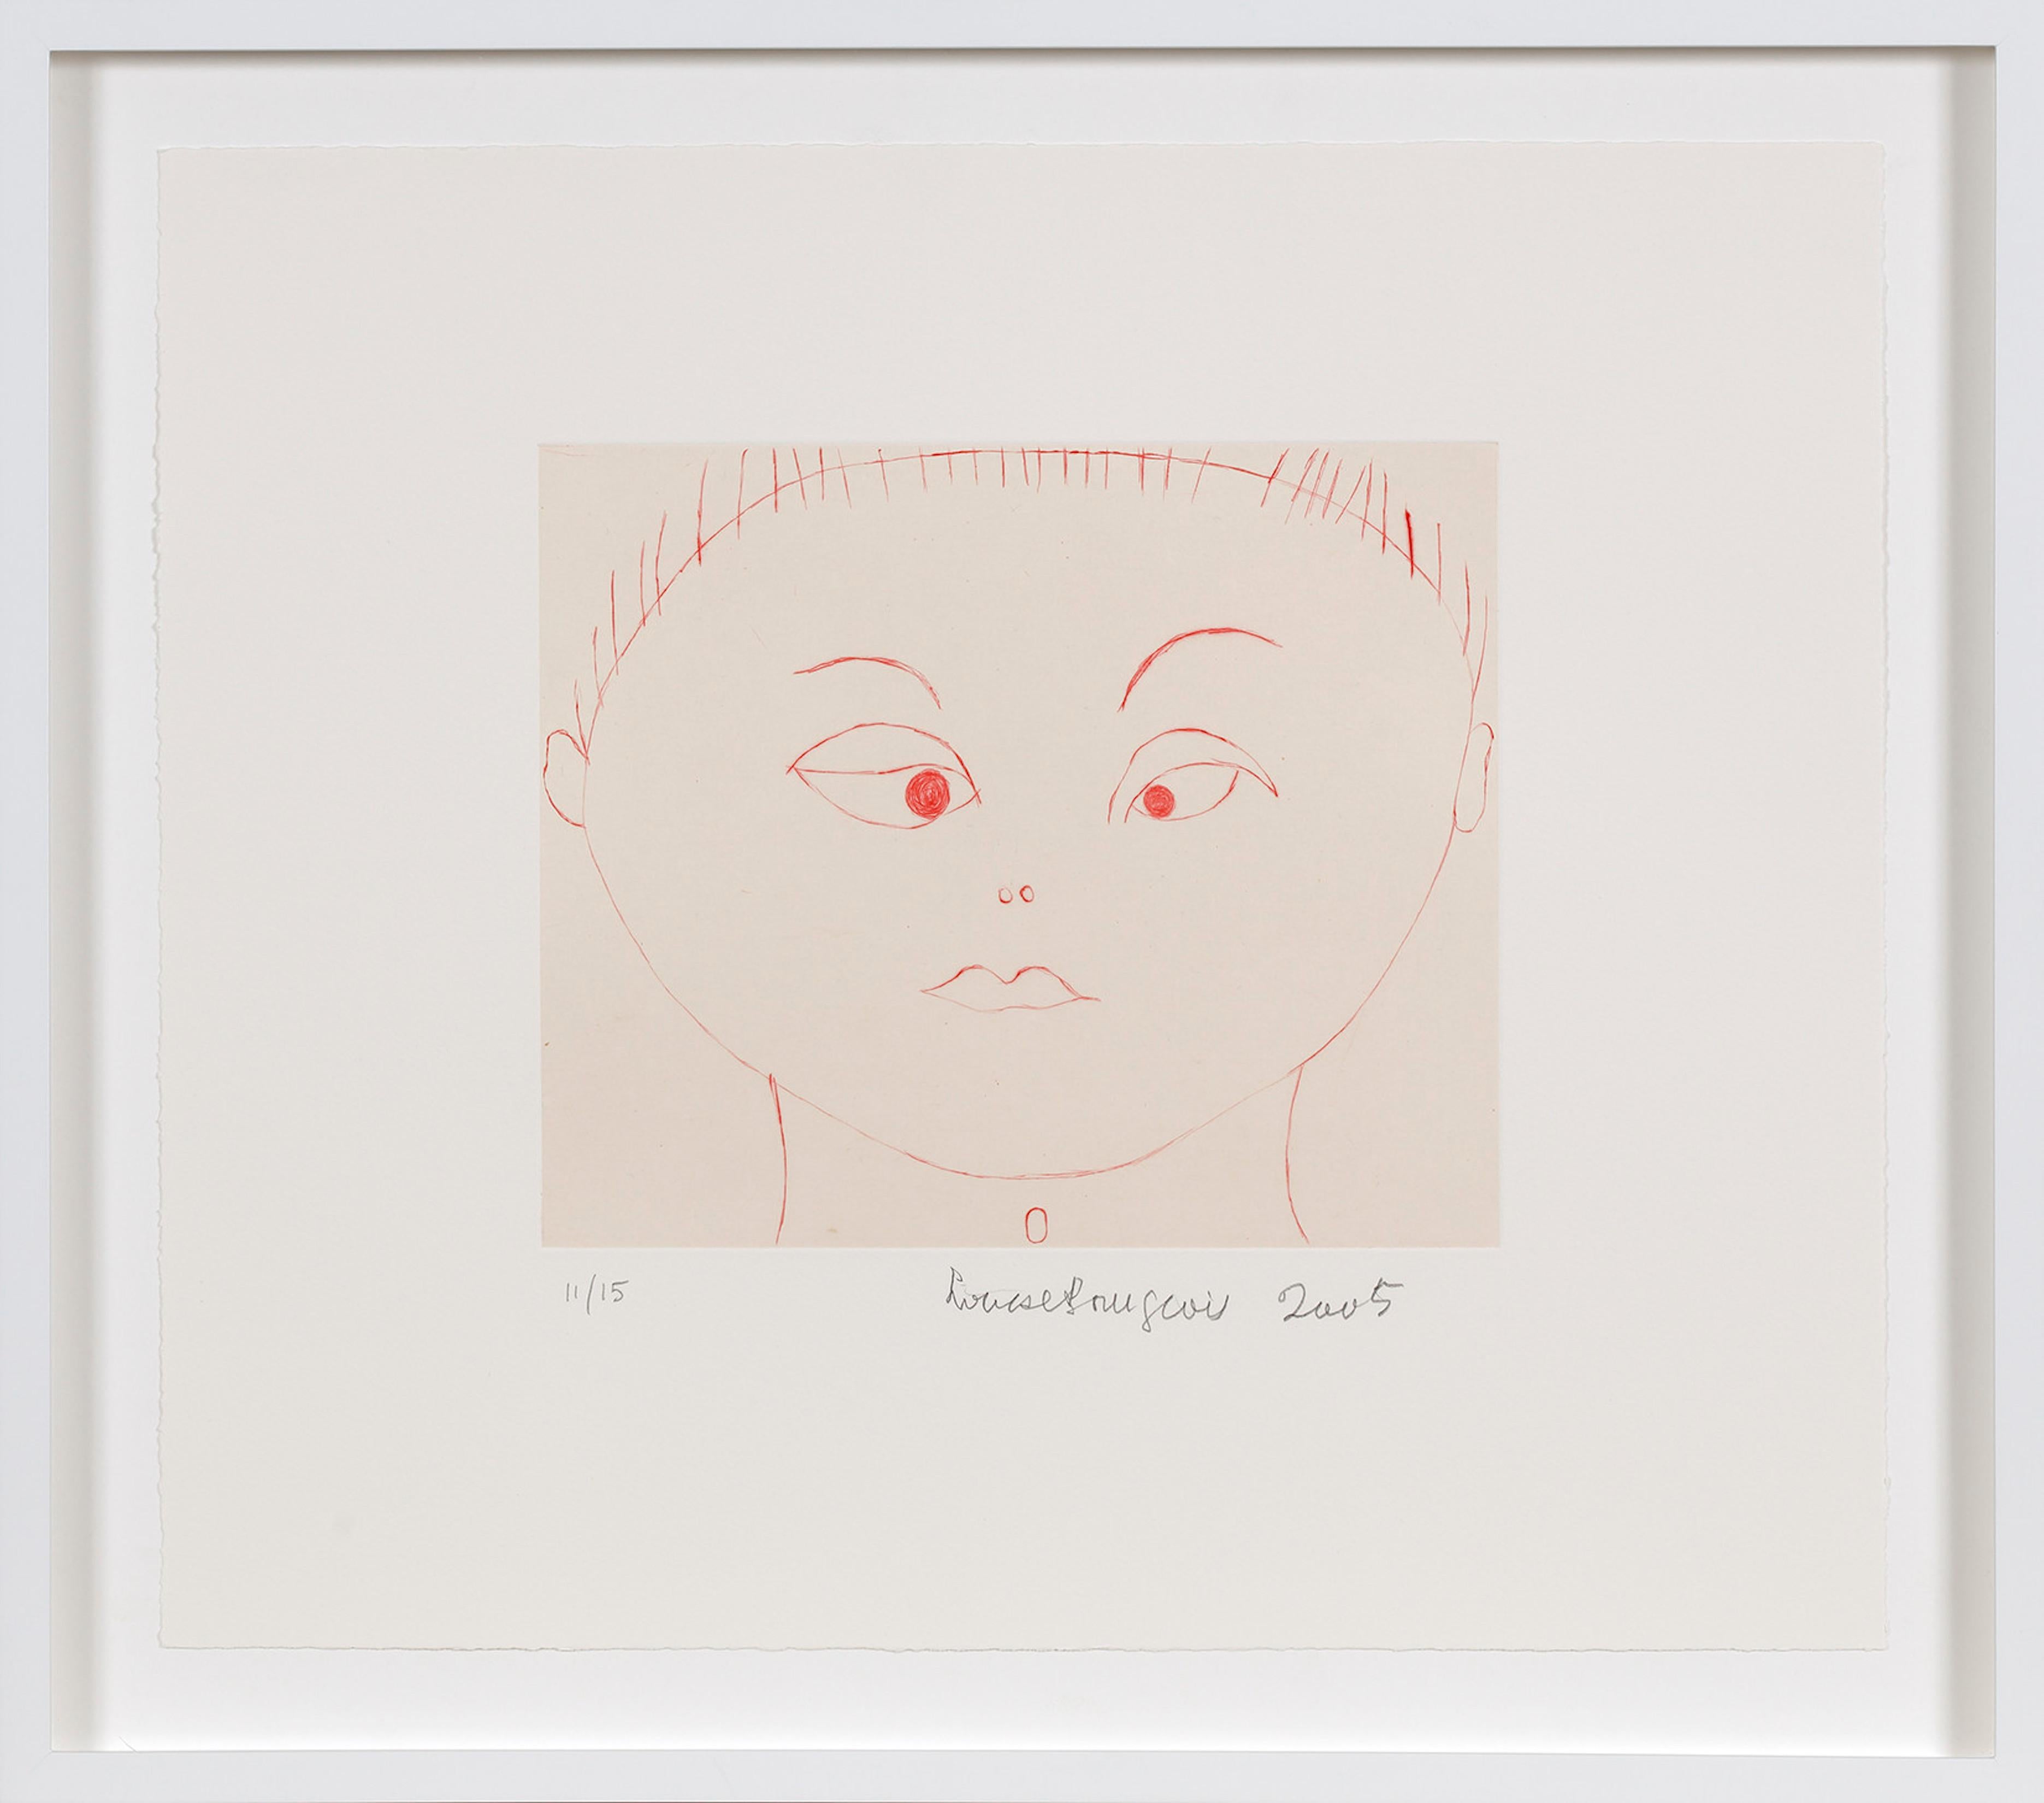 louise bourgeois together